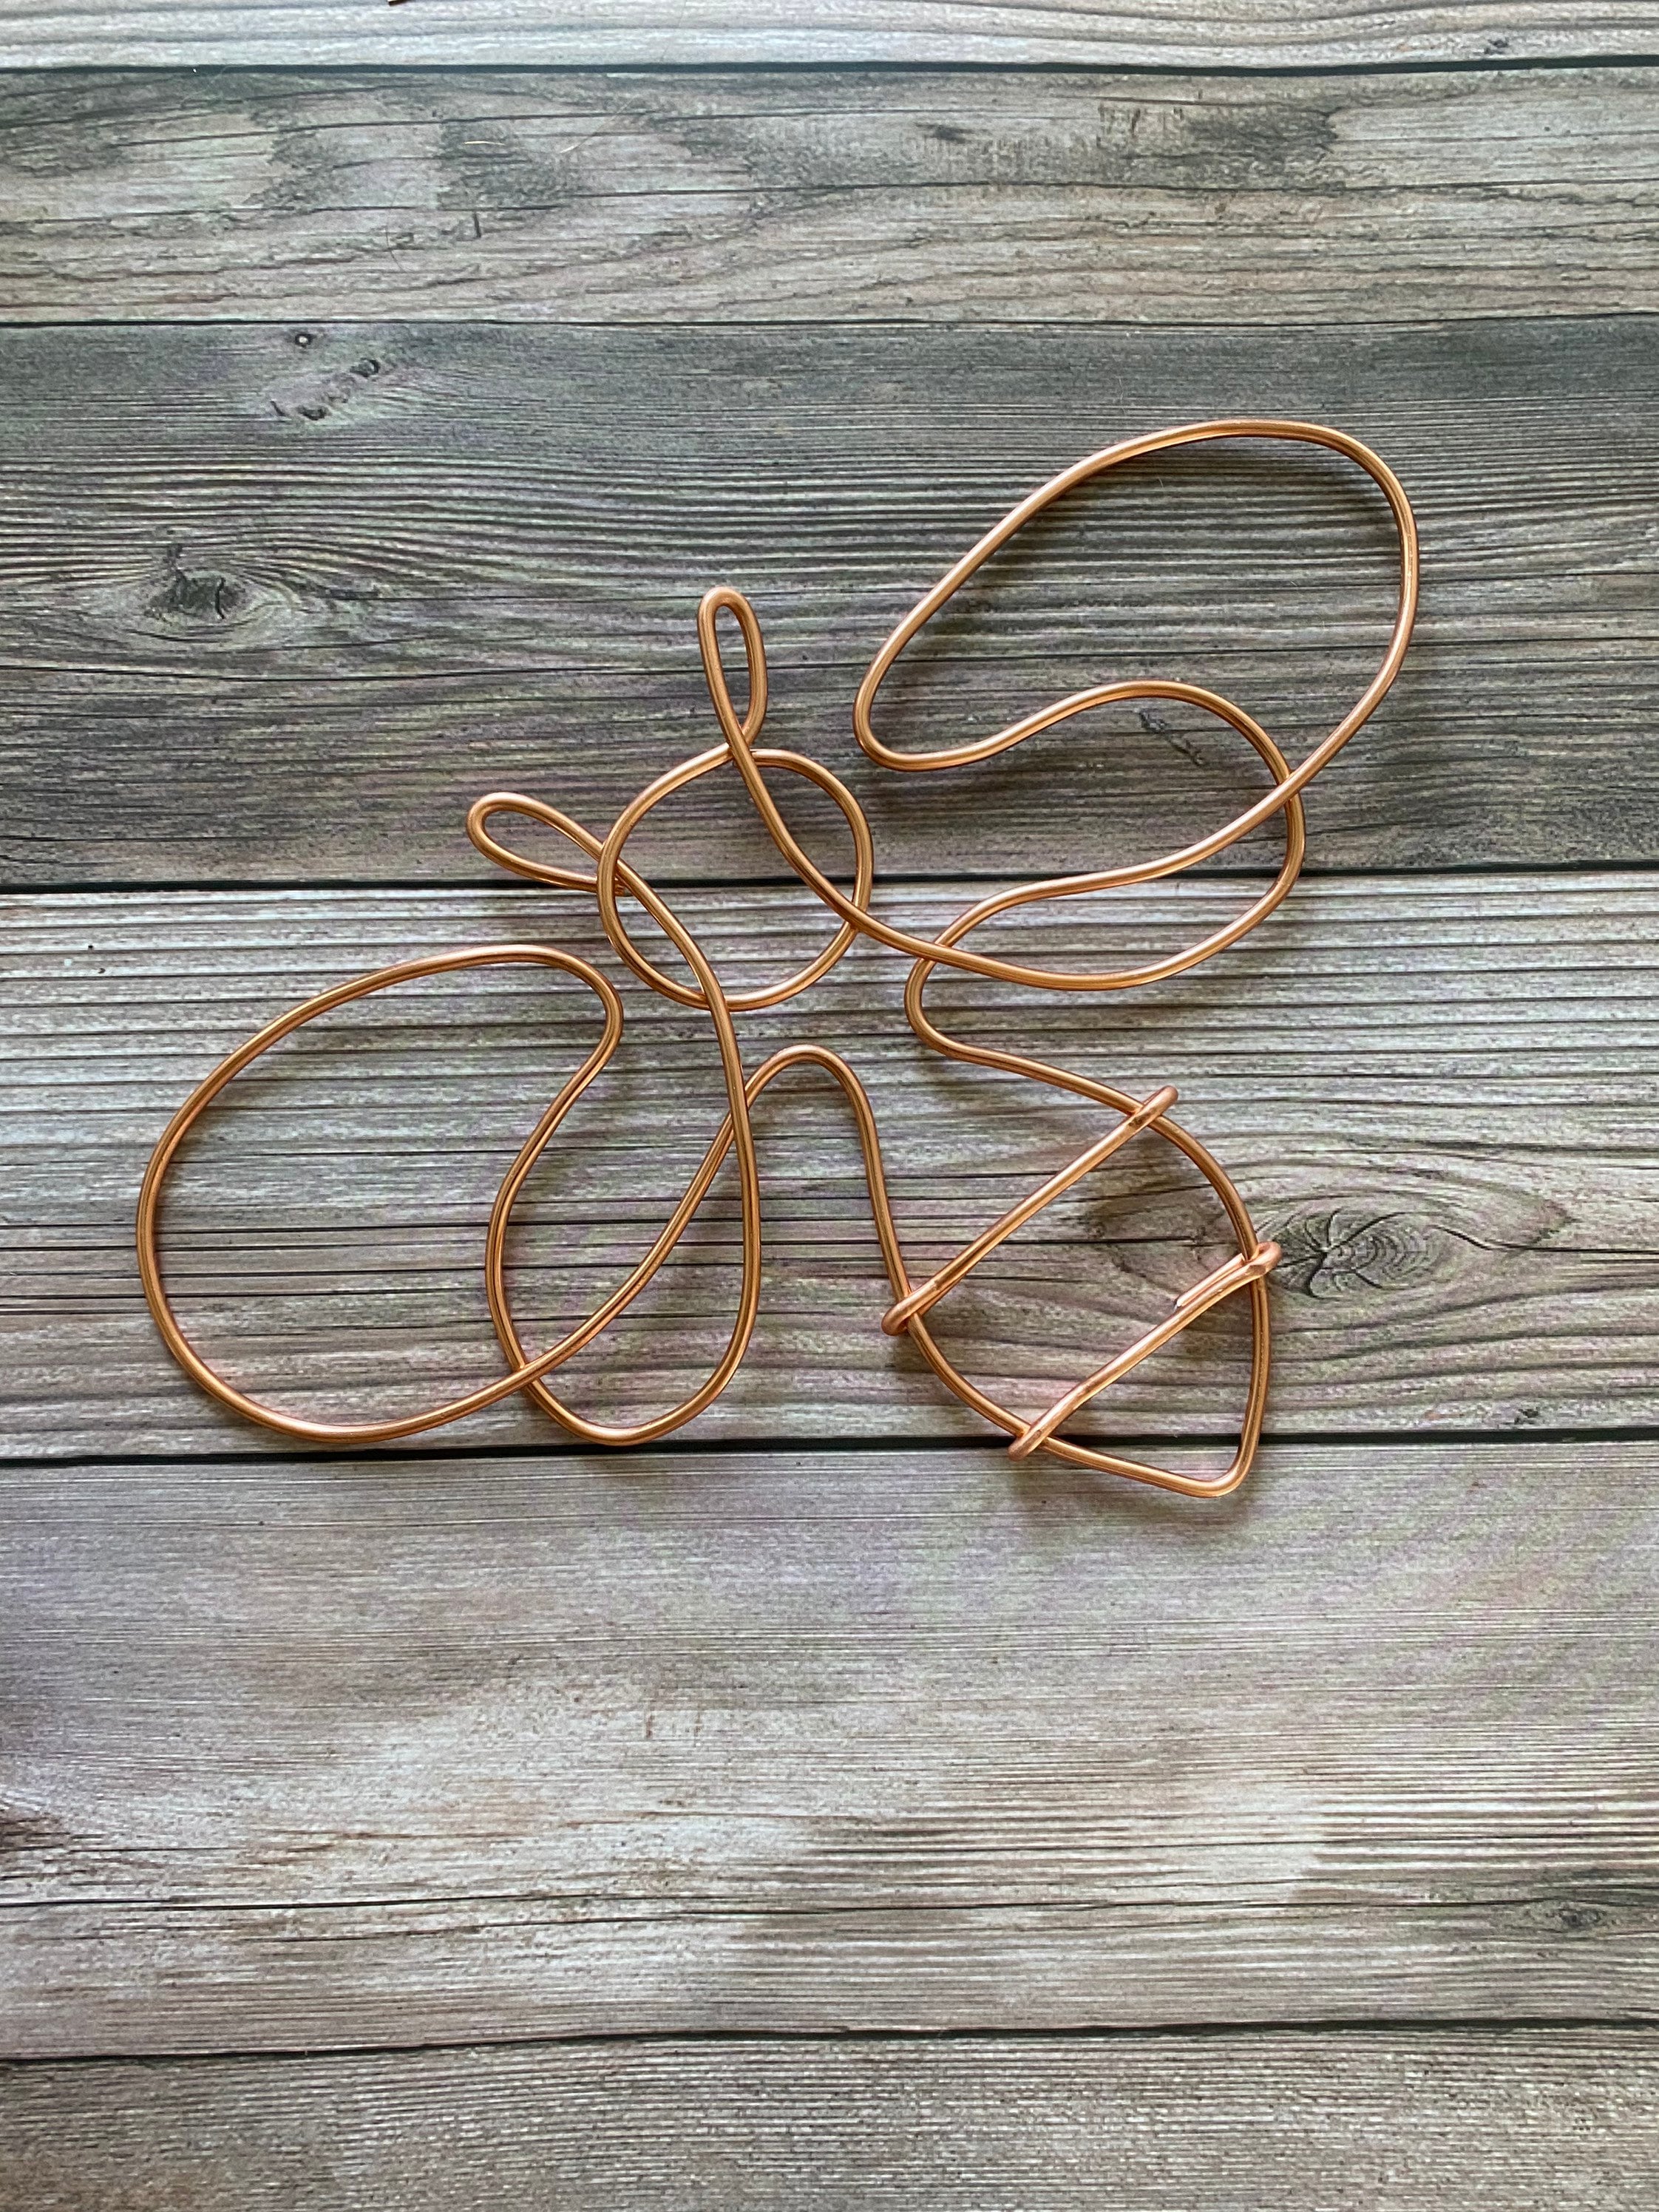 Flat Copper Wire, Flat Wire, Copper Tape, Copper Wire Tape, 1 Metre Flat  Wire, 3mm X 0.75mm Wire, Jewelry Wire, Wire Wrapping, UK Seller 